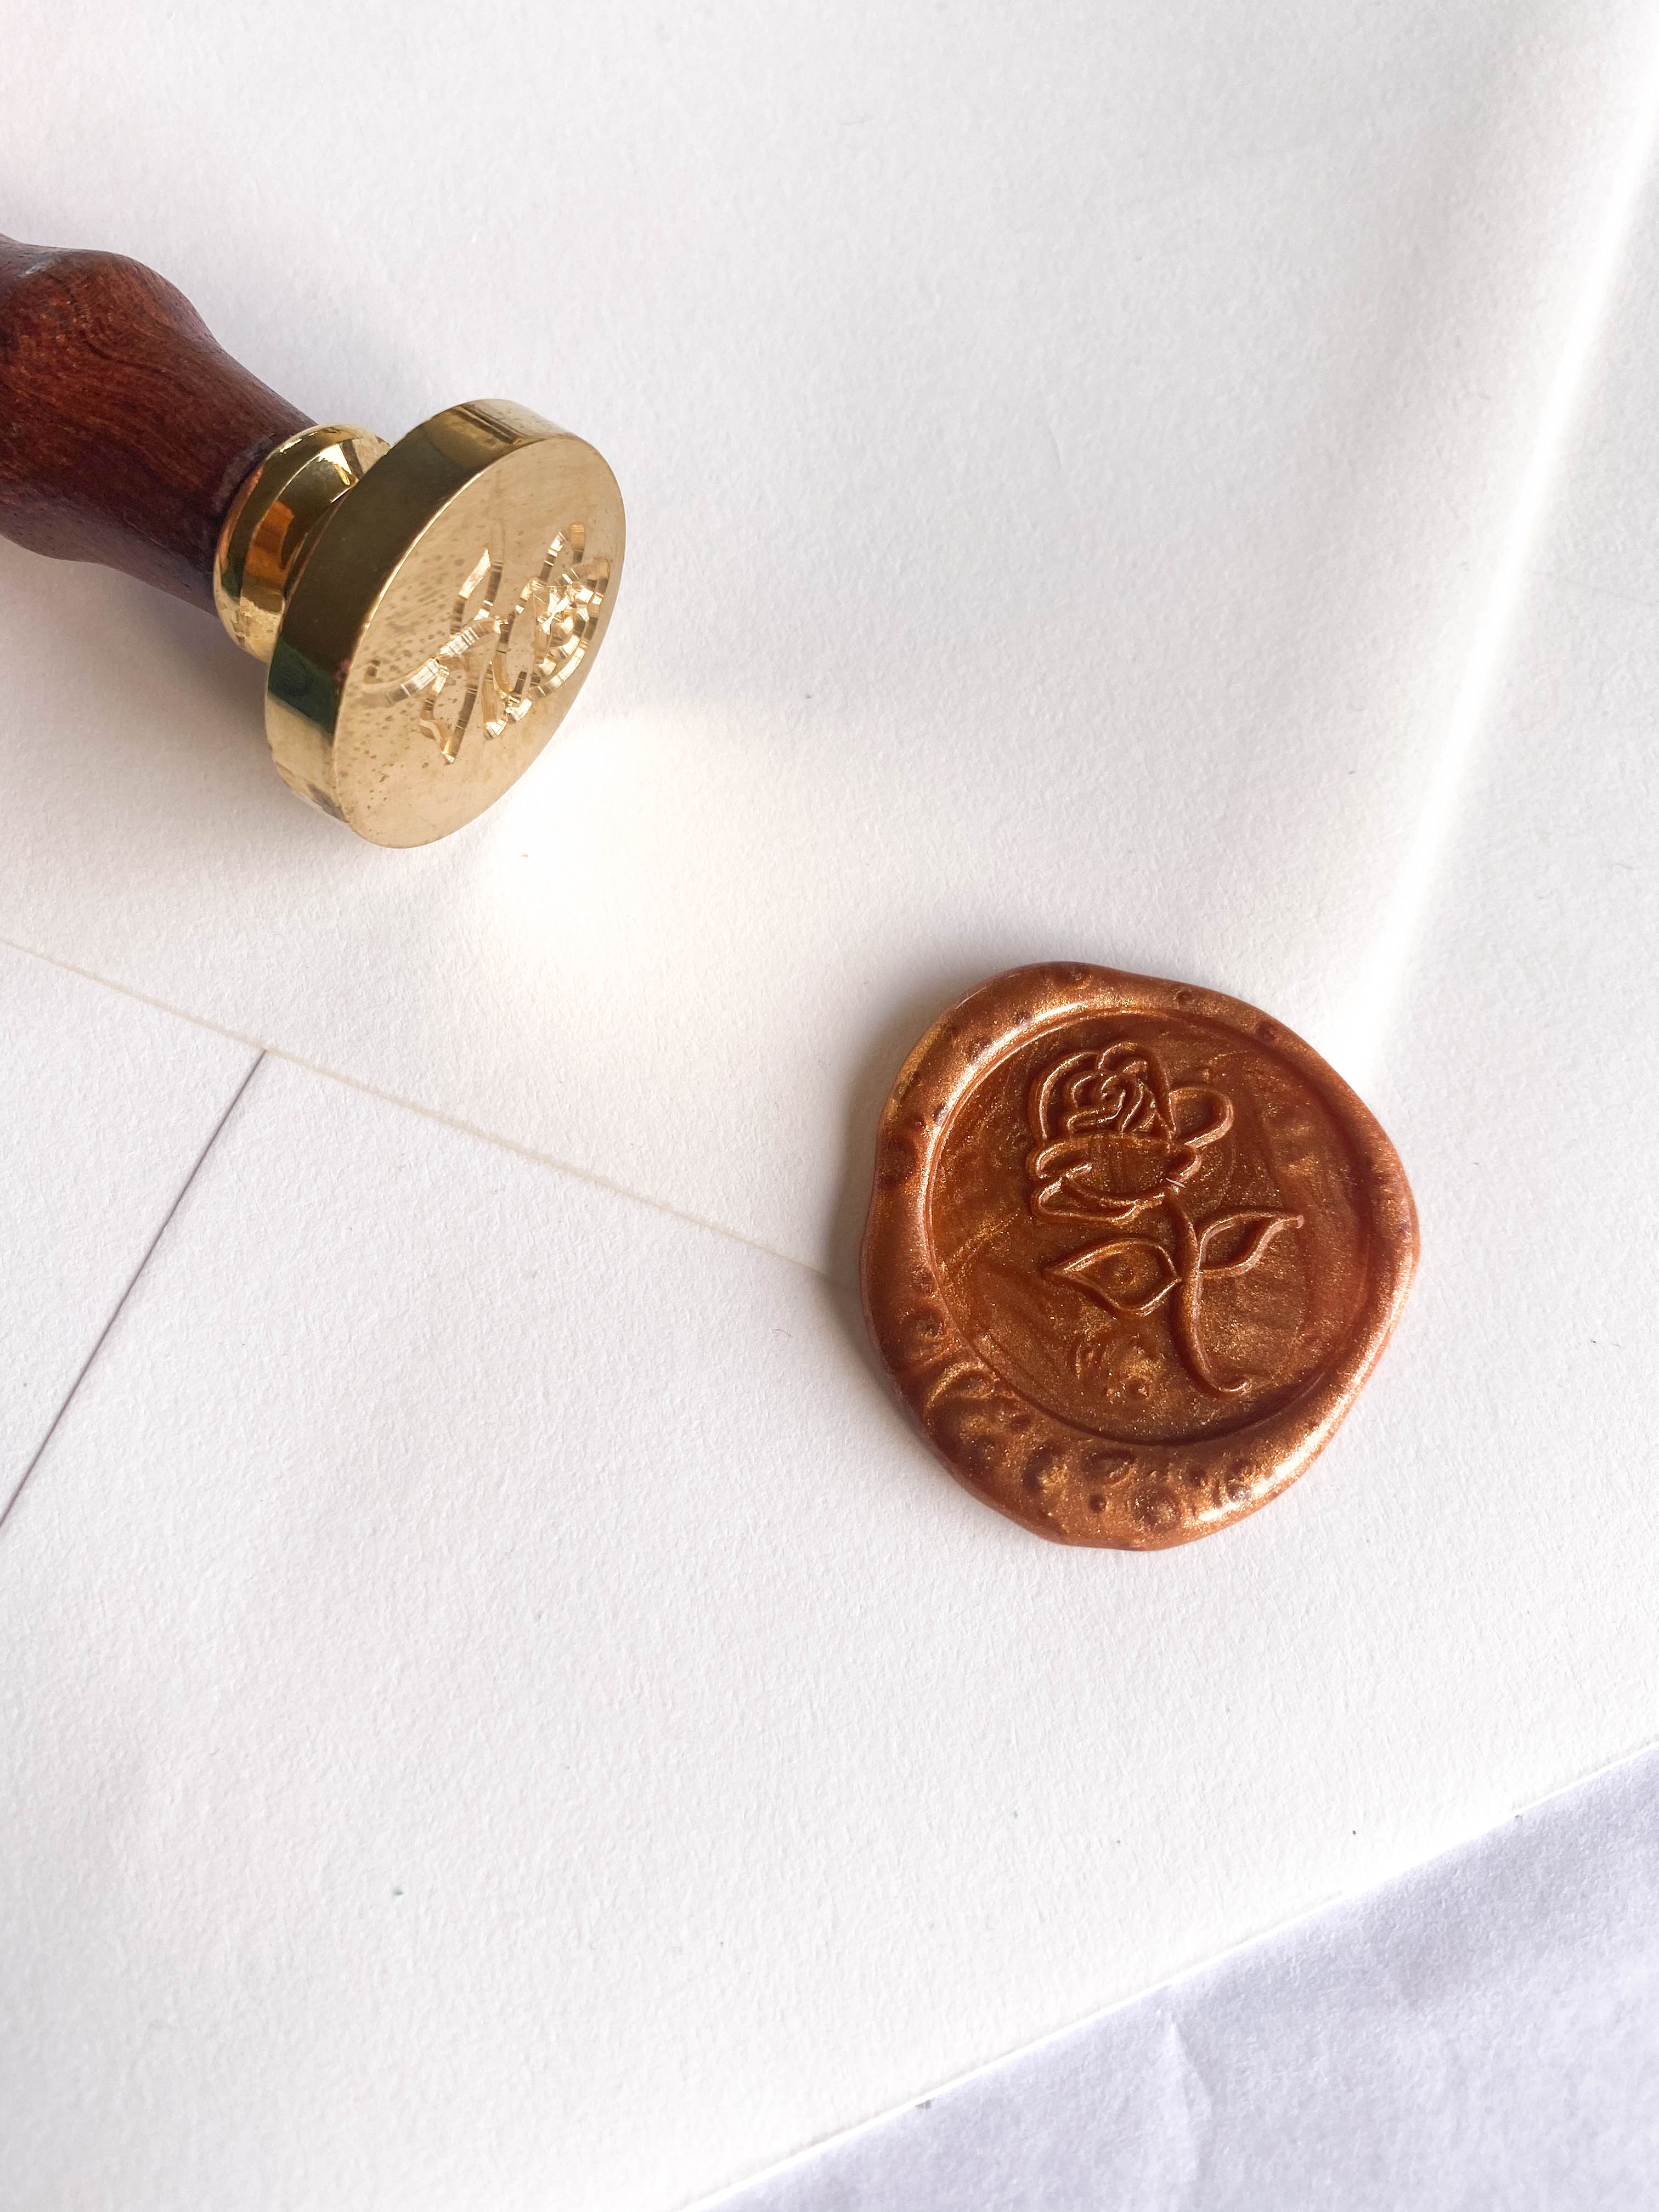 With Love Sealing Wax Stamp by Recollections™